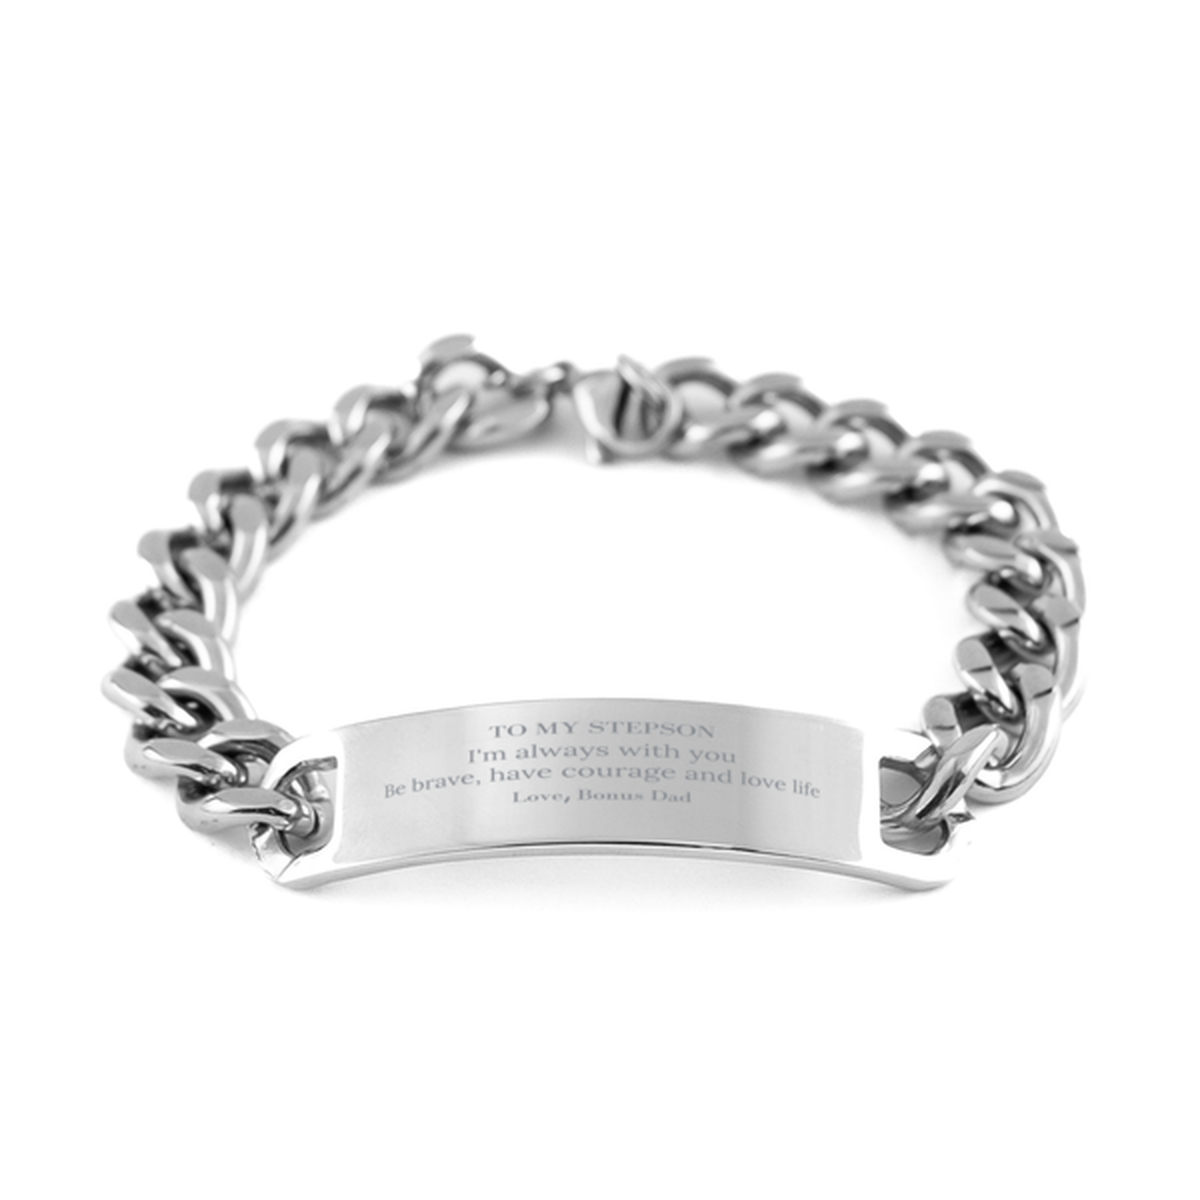 To My Stepson Gifts from Bonus Dad, Unique Cuban Chain Stainless Steel Bracelet Inspirational Christmas Birthday Graduation Gifts for Stepson I'm always with you. Be brave, have courage and love life. Love, Bonus Dad